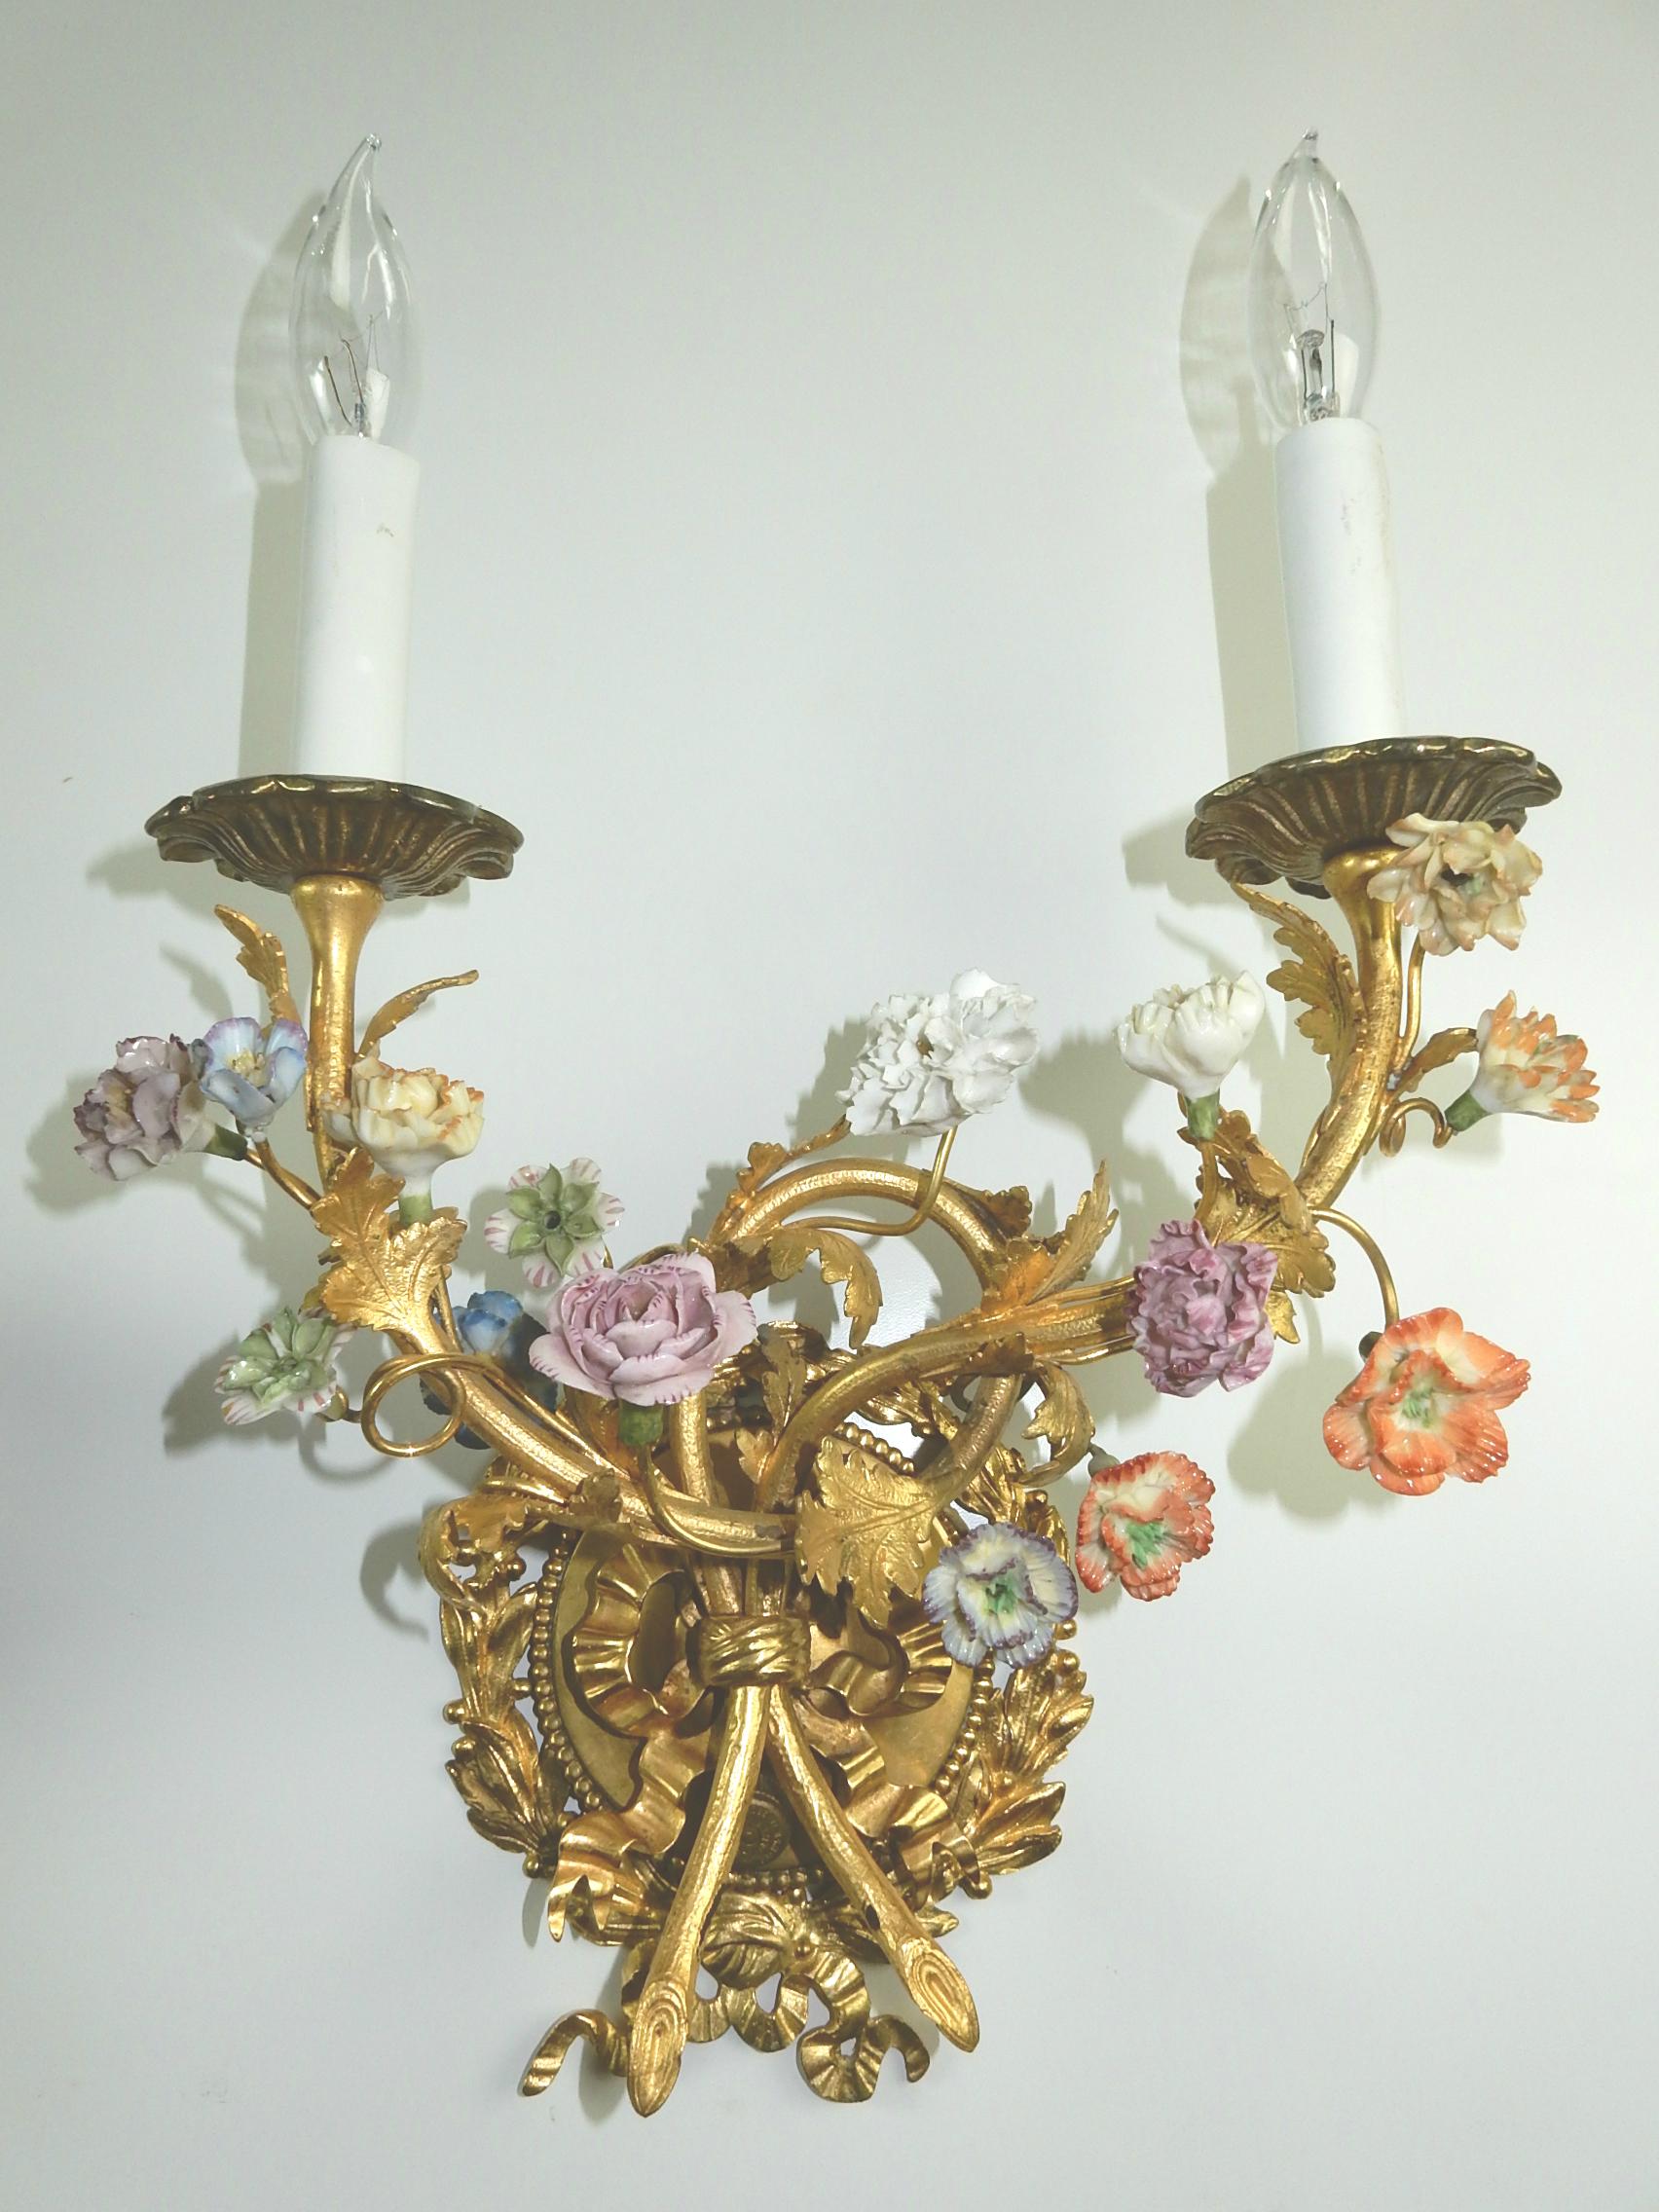 Fabulous pair of vintage sconces plated in a gilded gold with floral motif of actual hand painted porcelain flowers.
Both in perfect working order and very good original condition. Ready to mount at any standard electrical box, hardware included.